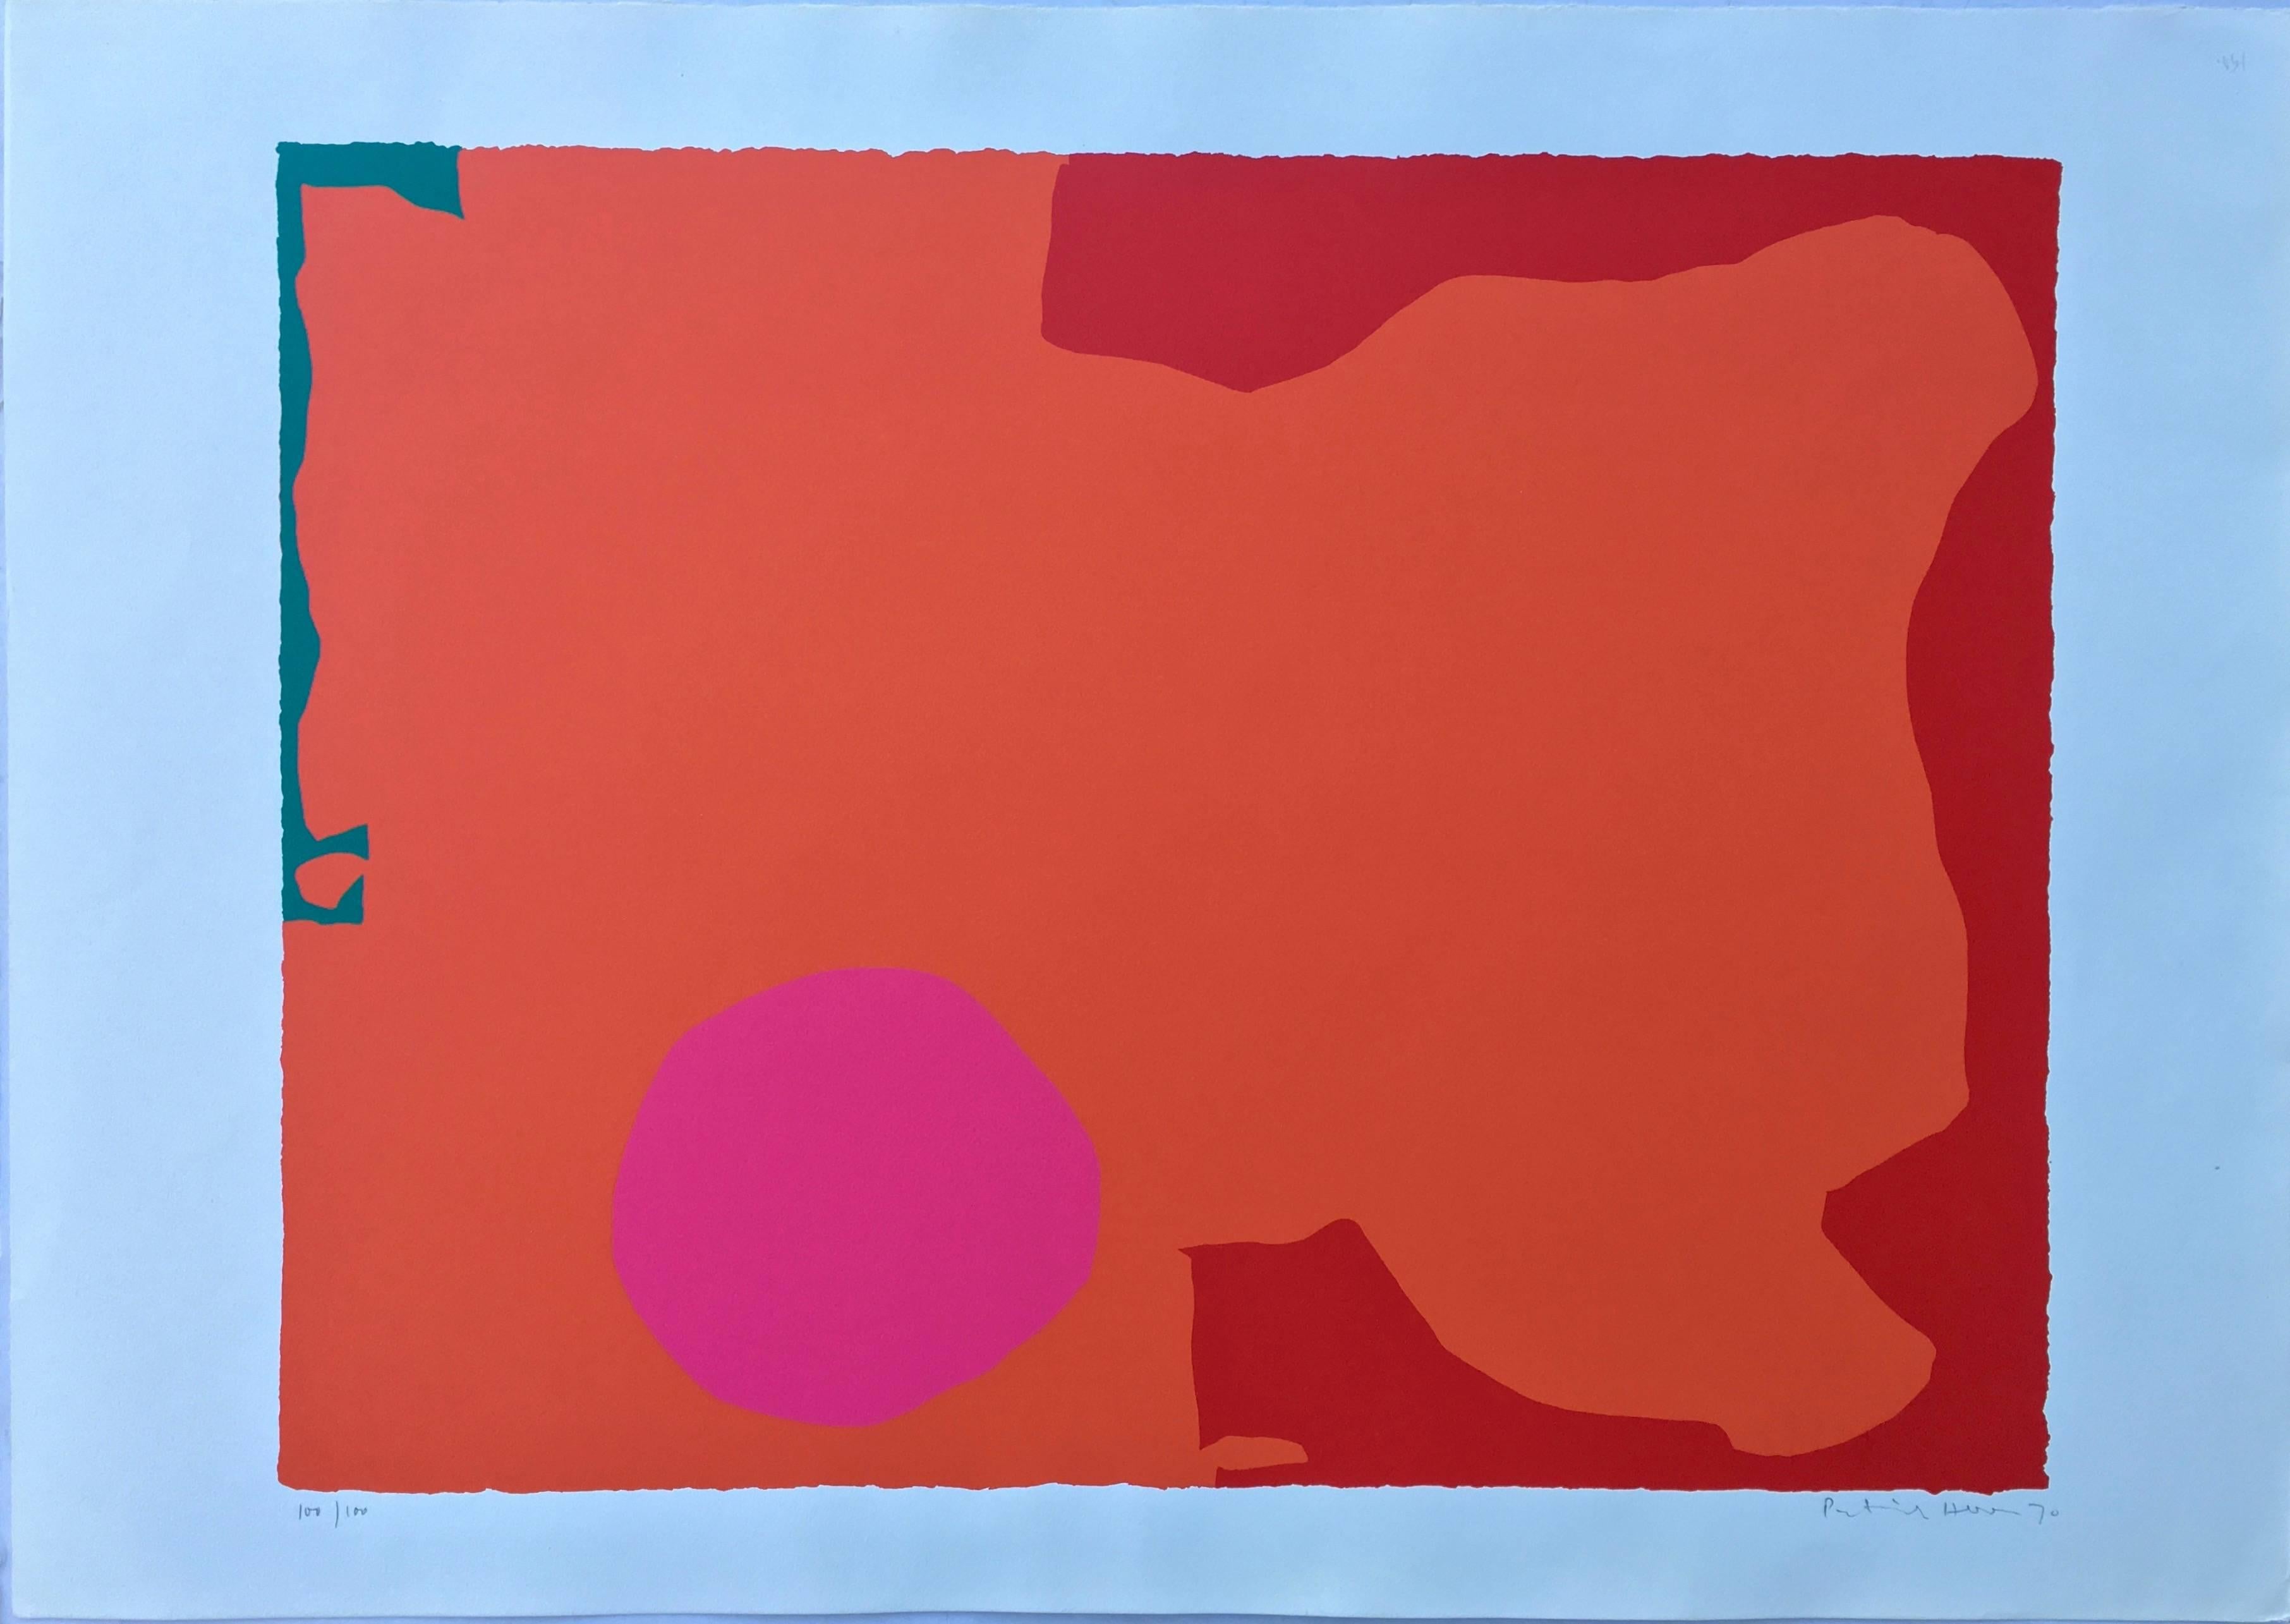 Patrick Heron.
Magenta disc, red edge
1970.
Screen print on paper.
Measures: 29 3/4 x 41 7/8.

Patrick Heron (1920-1999) was an abstract painter, printmaker and writer working in Cornwall, Great Britain.